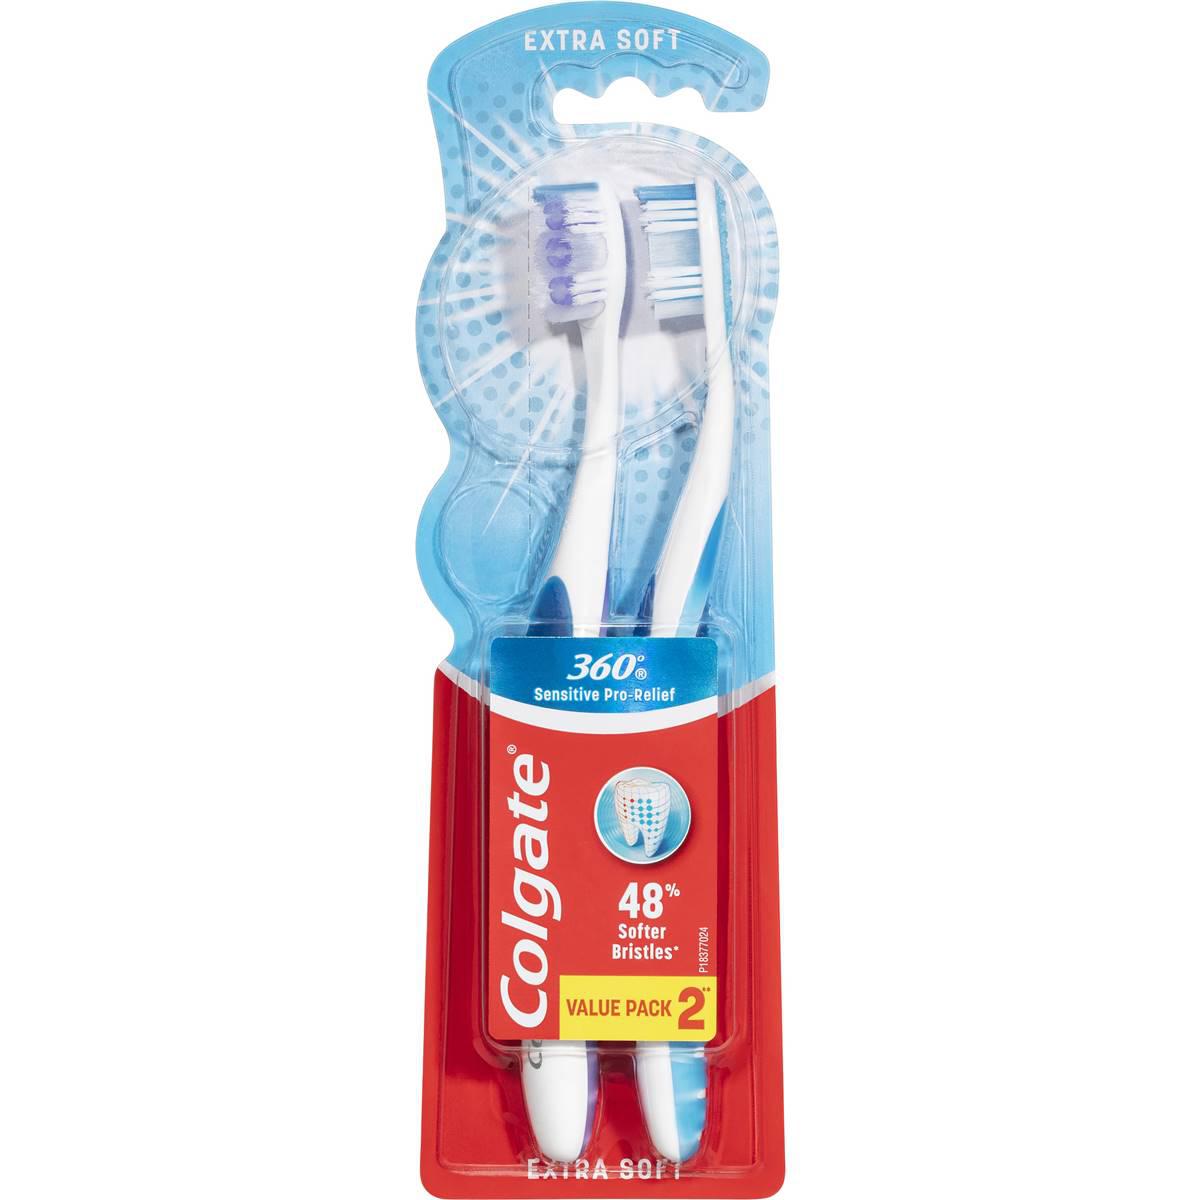 Colgate Toothbrush 360 Pro-relief Teeth Pain Soft 2 Pack